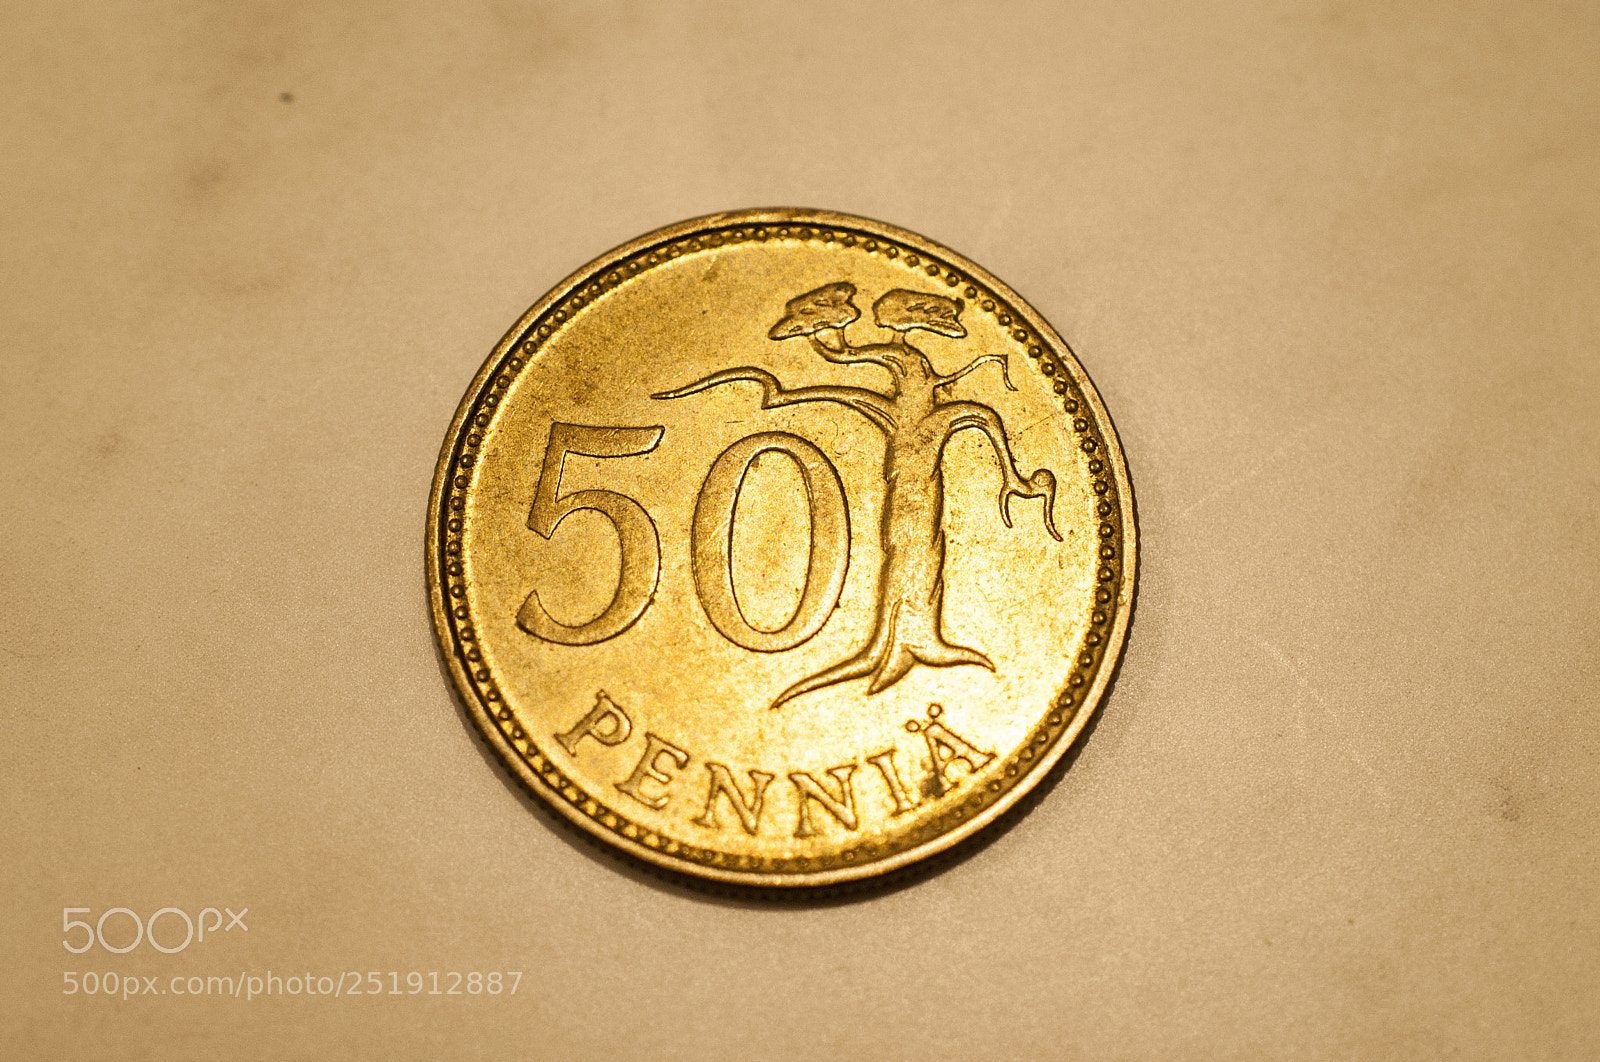 Nikon D700 sample photo. Finland coin penny front photography